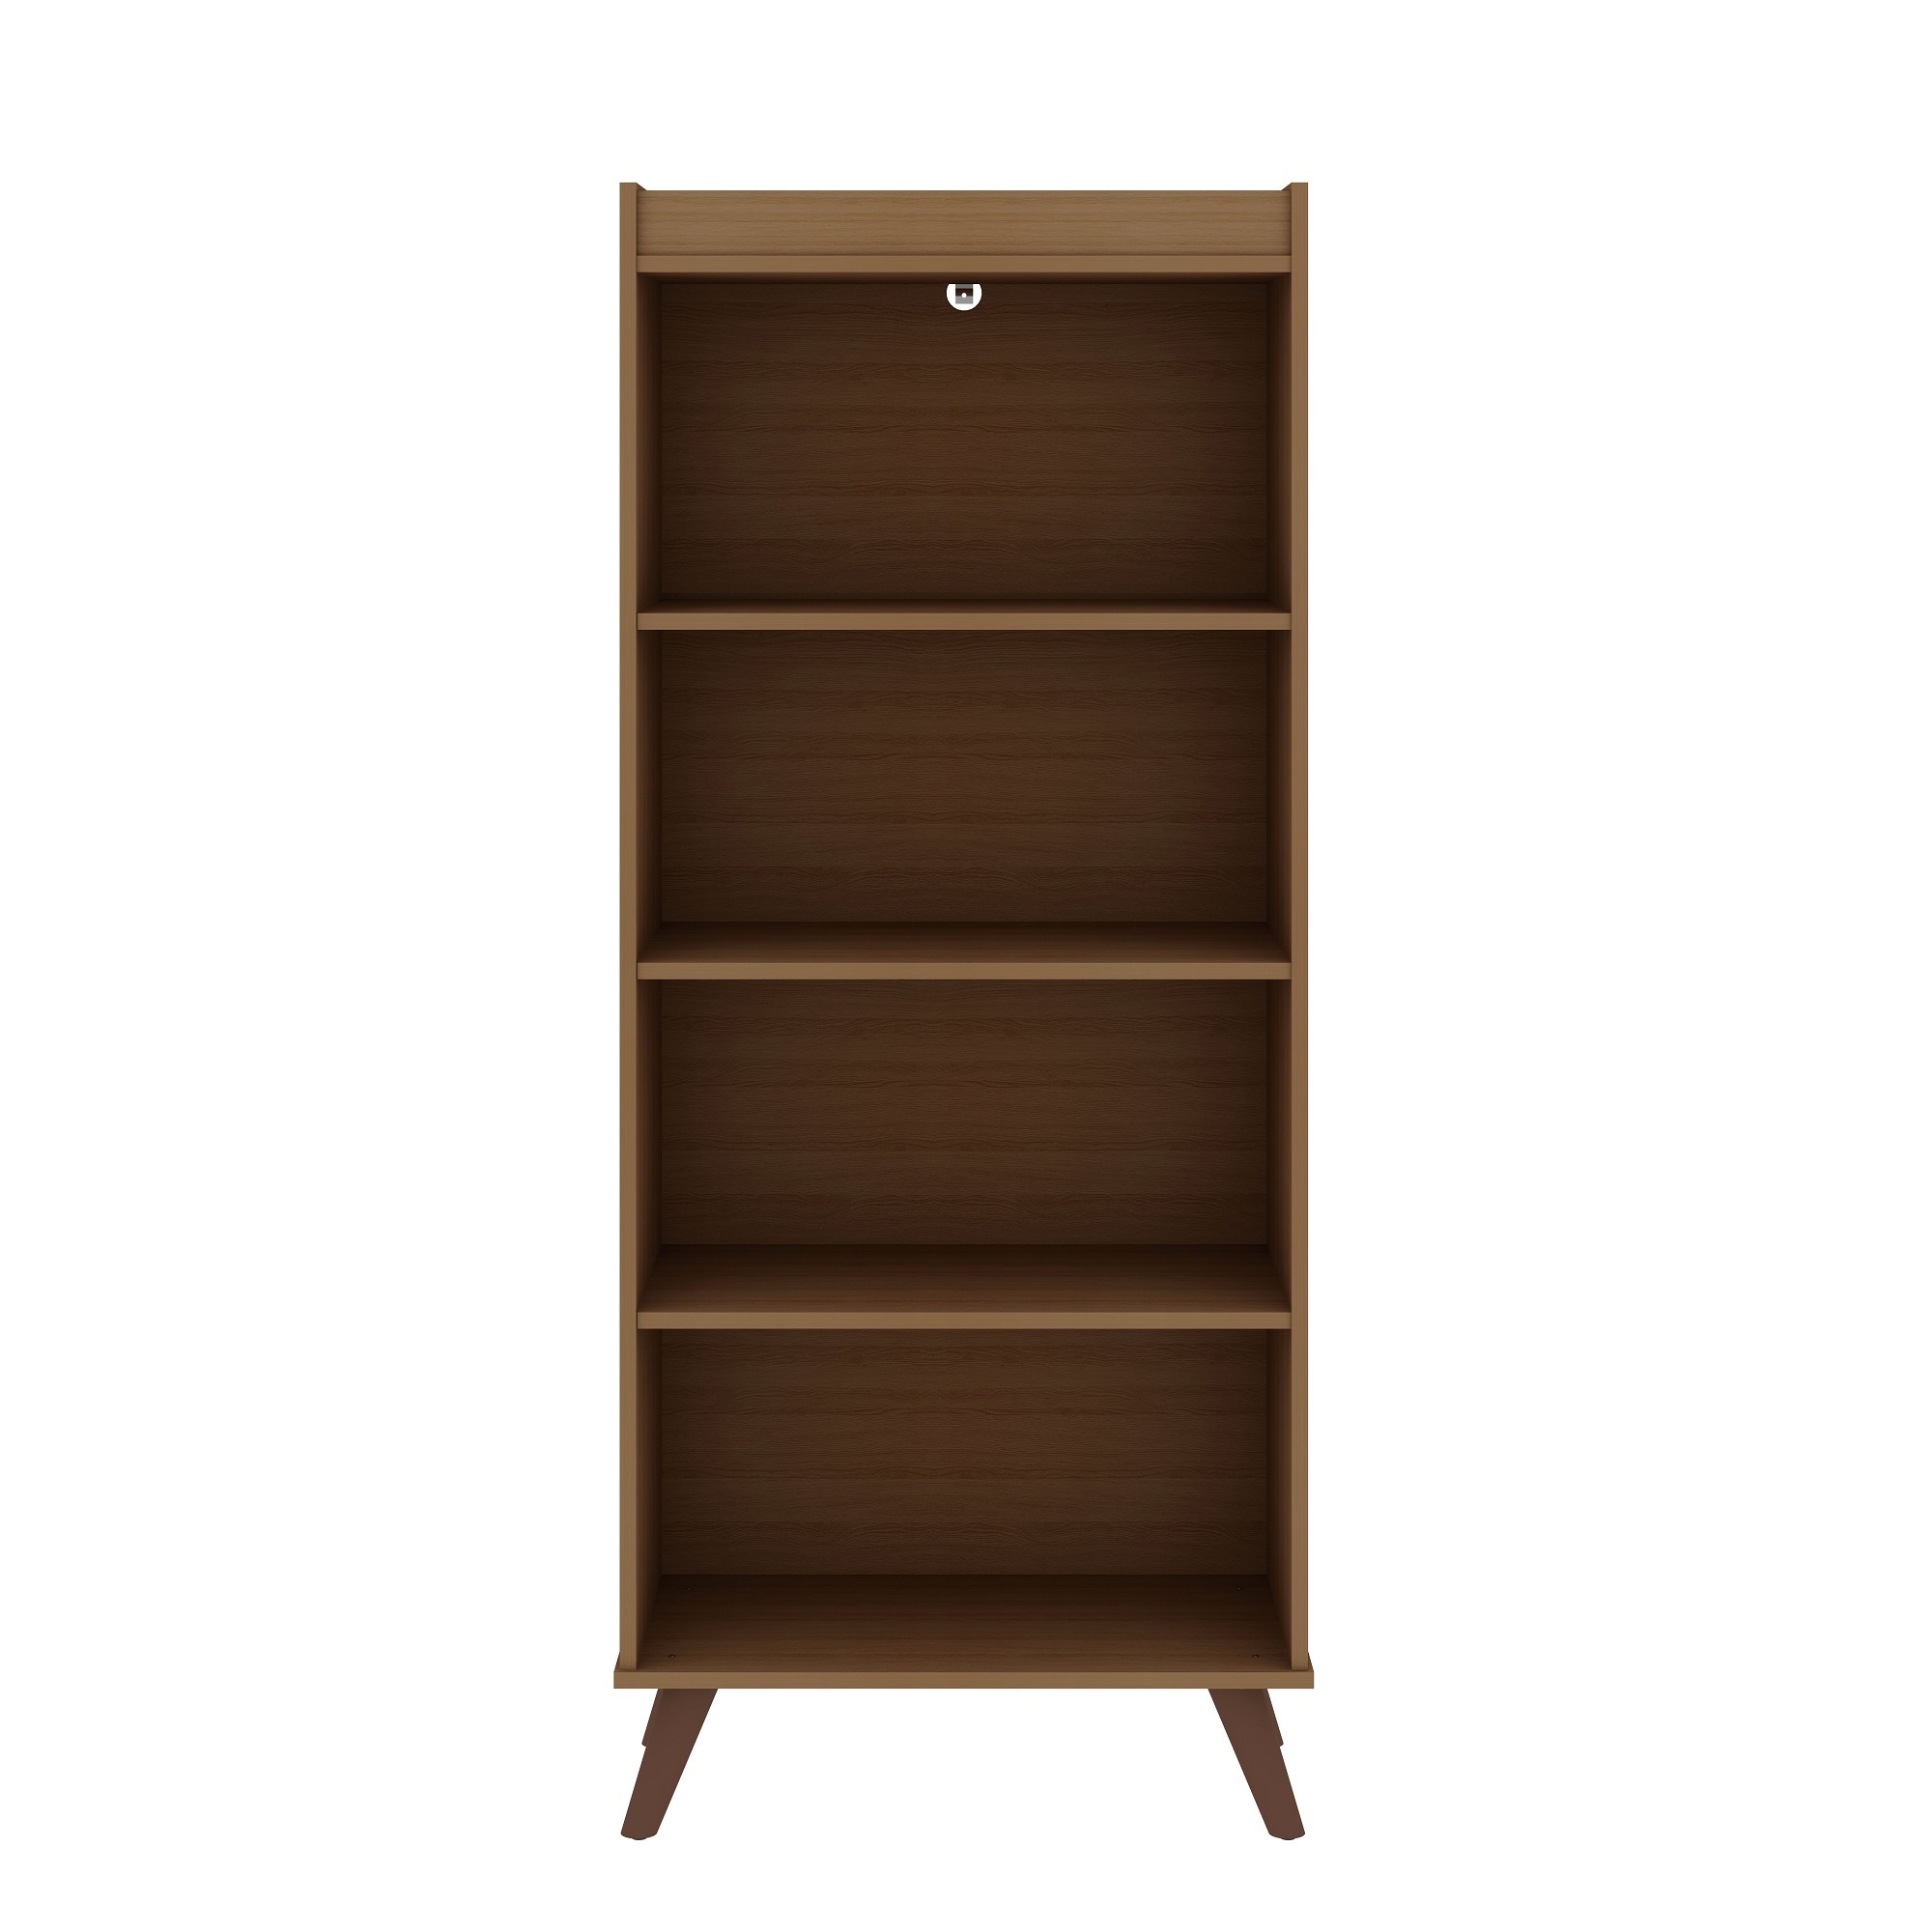 Manhattan Comfort, Hampton 4-Tier Bookcase Solid Wood Legs Maple Crm, Height 60.12 in, Shelves (qty.) 4 Material MDPE, Model 12PMC